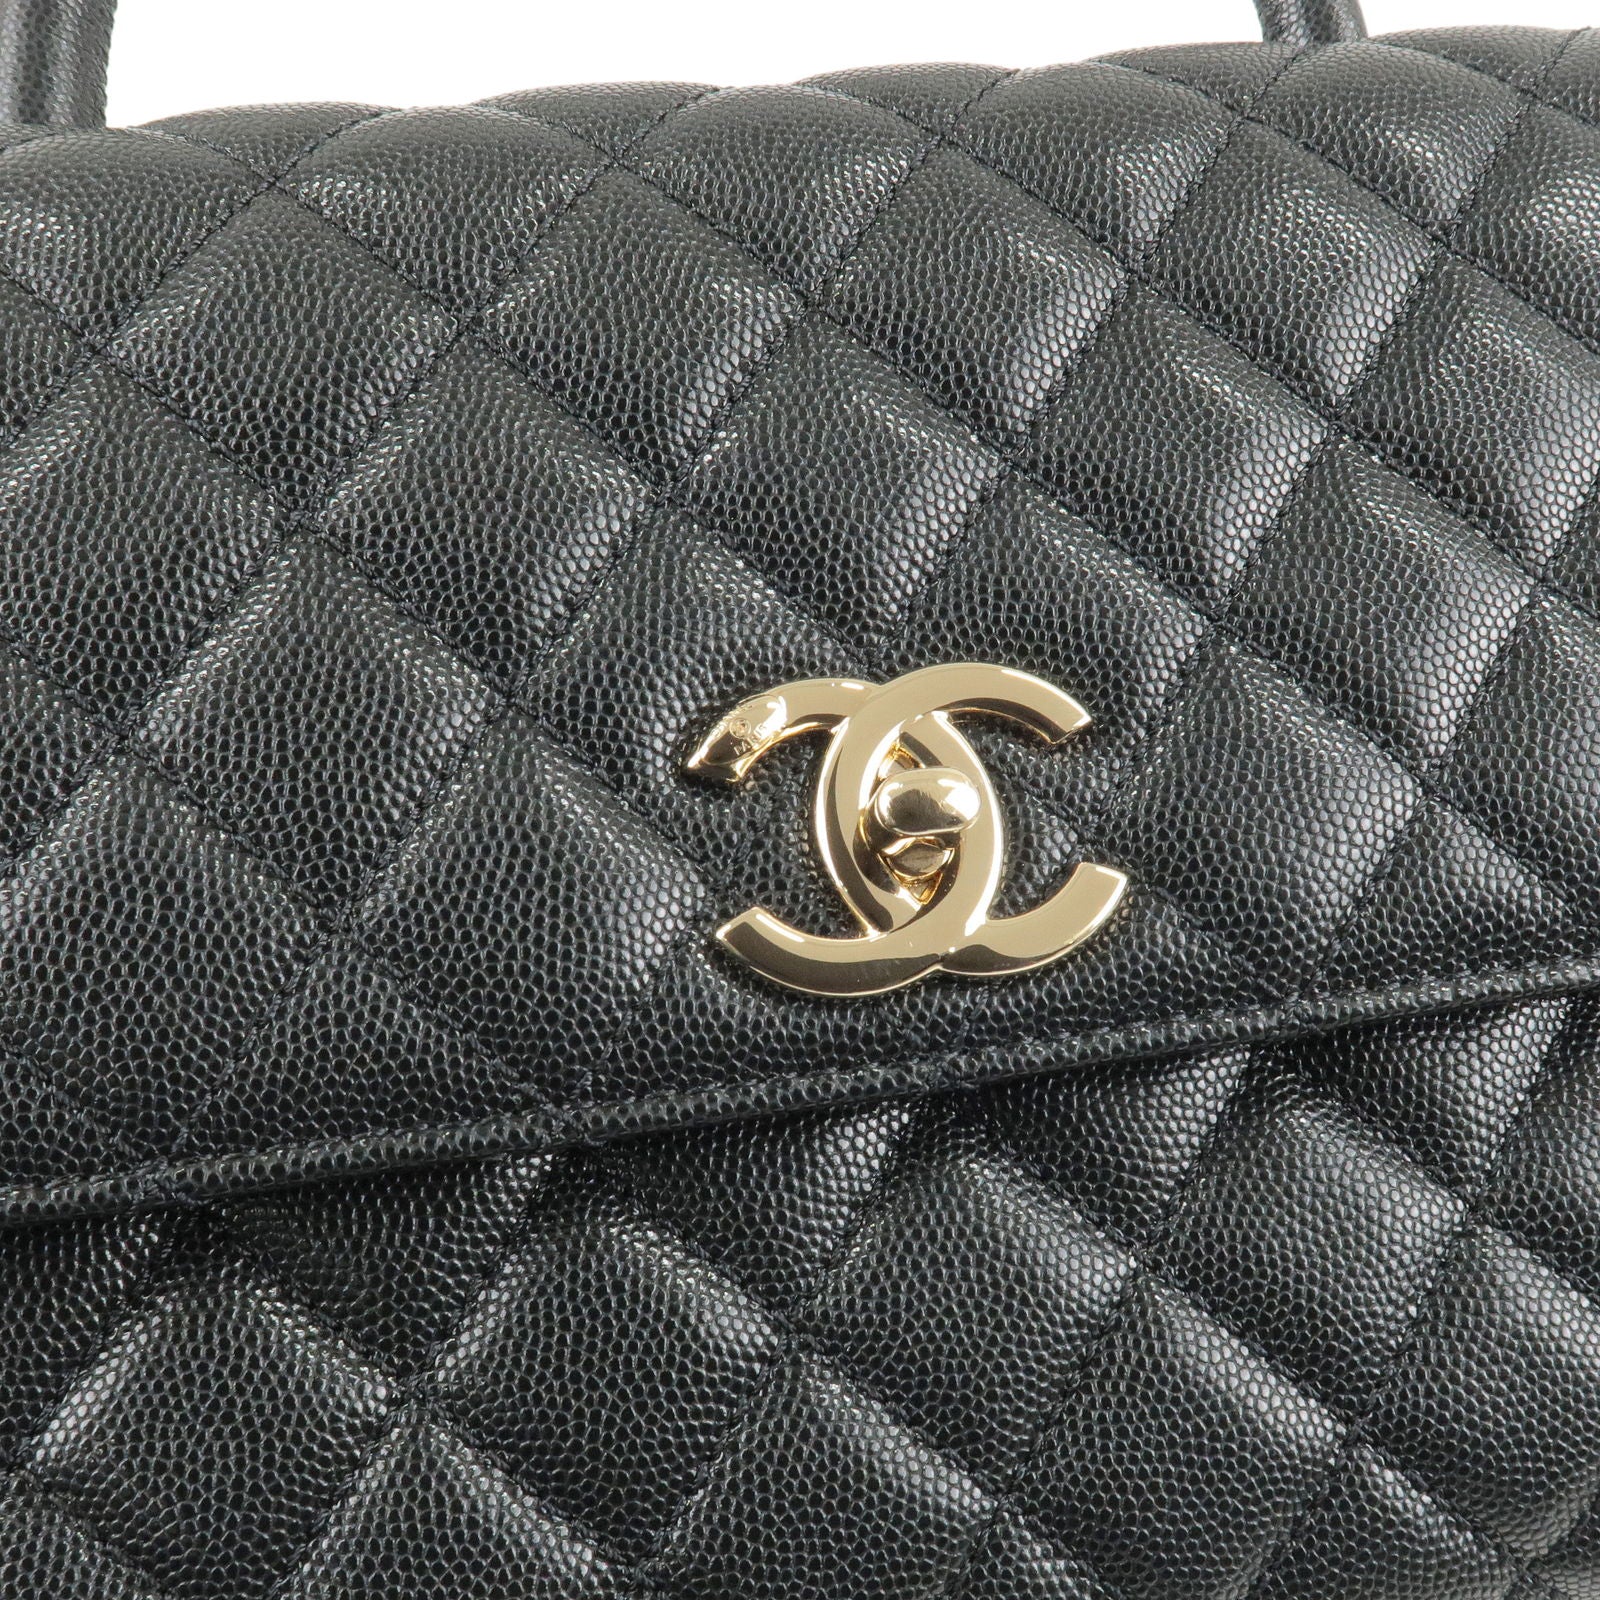 Chanel Pre-owned 1990-2000s Mini Classic Flap Bag - Gold